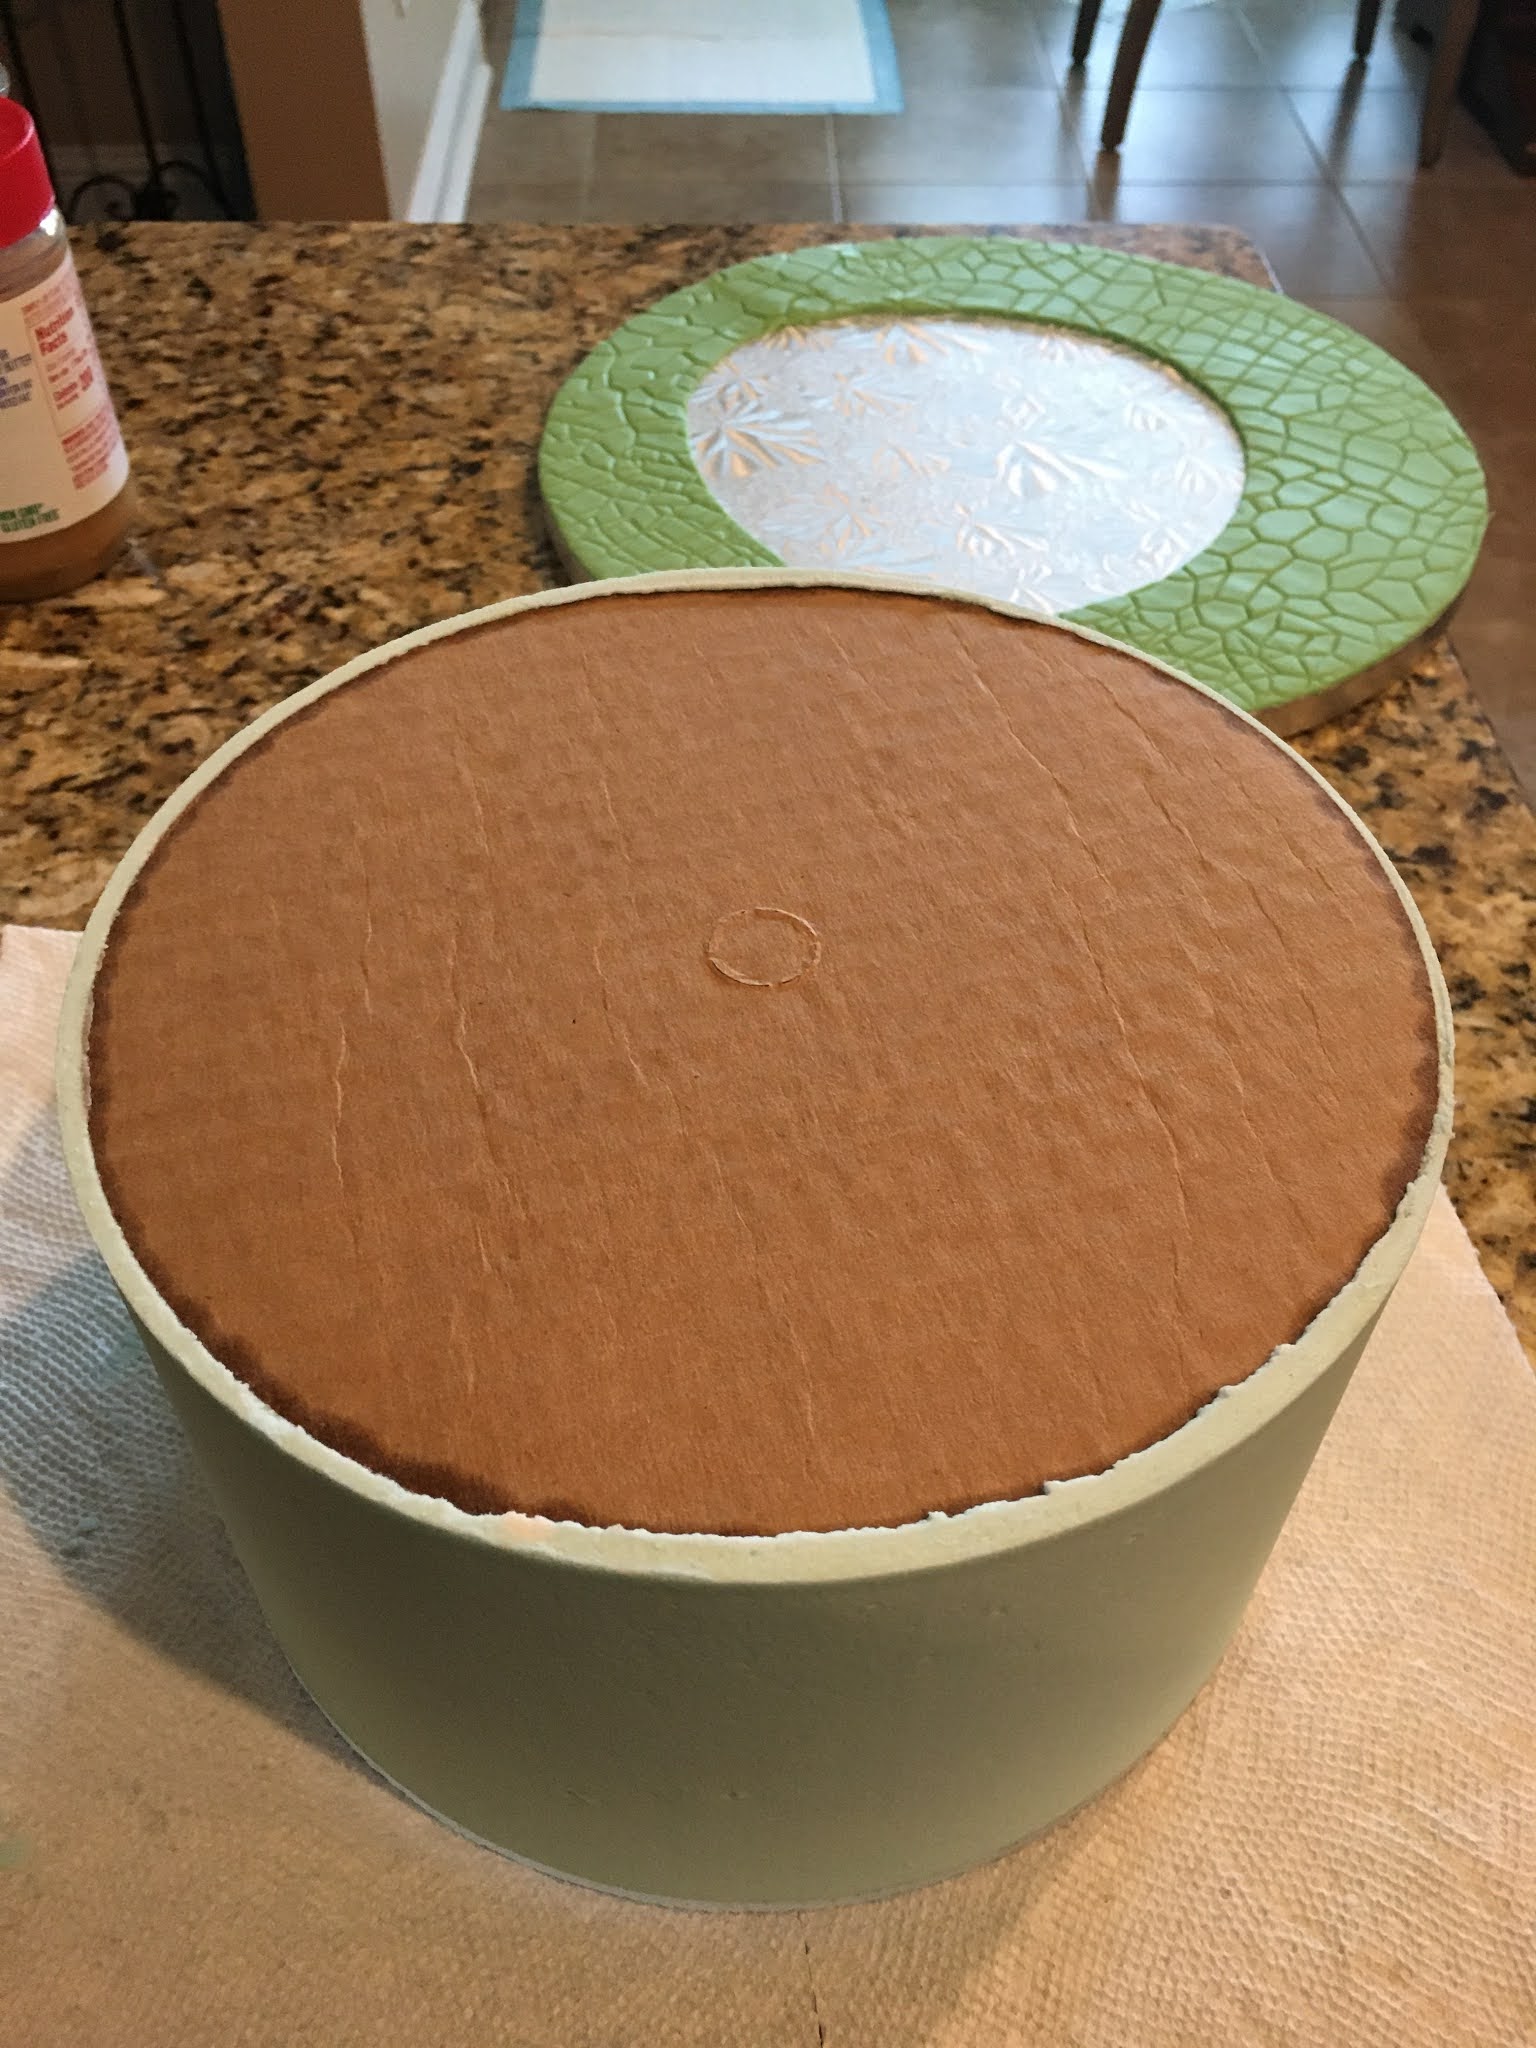 How to use and Acrylic Cake Disc for Smooth Frosting and Sharp